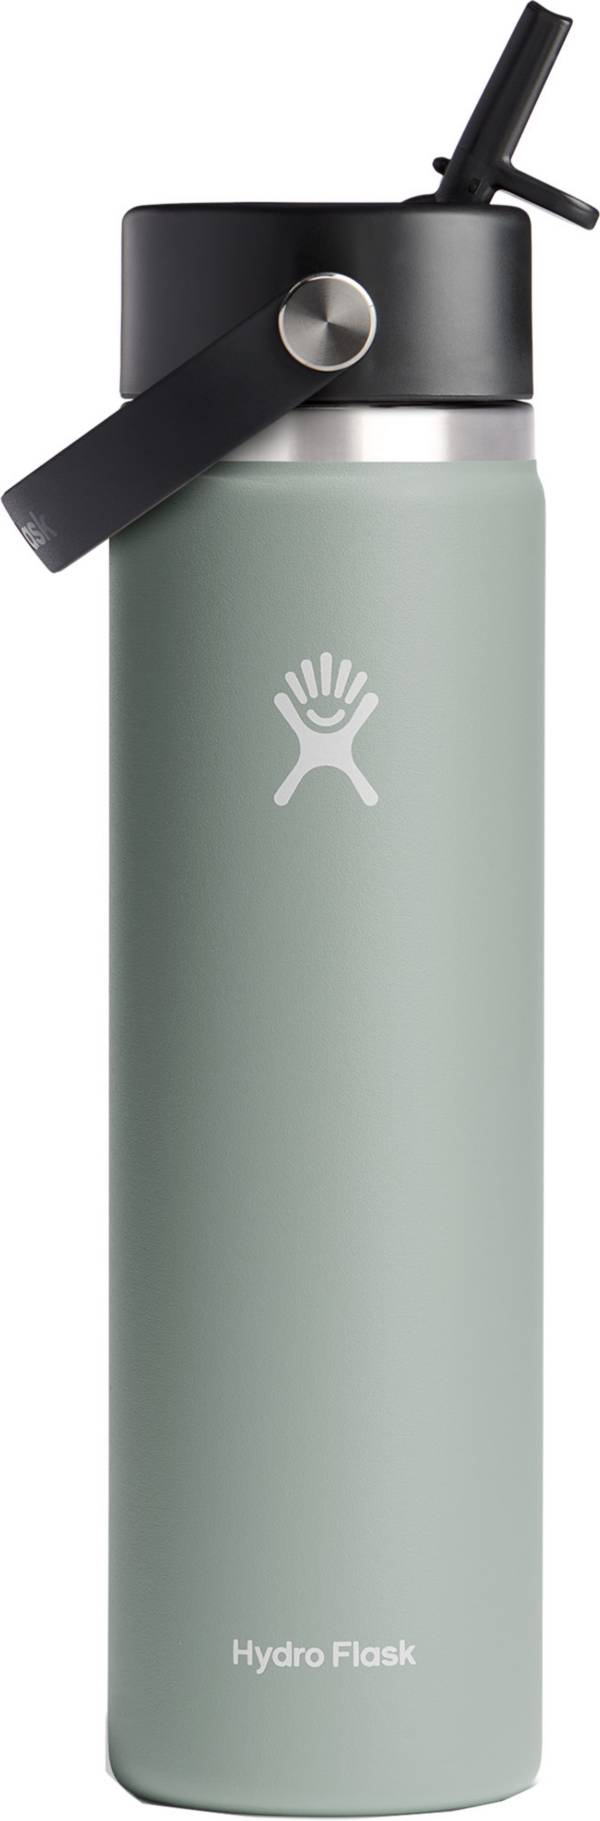 Hydro Flask 24 oz. Wide Mouth Bottle with Flex Straw Cap product image